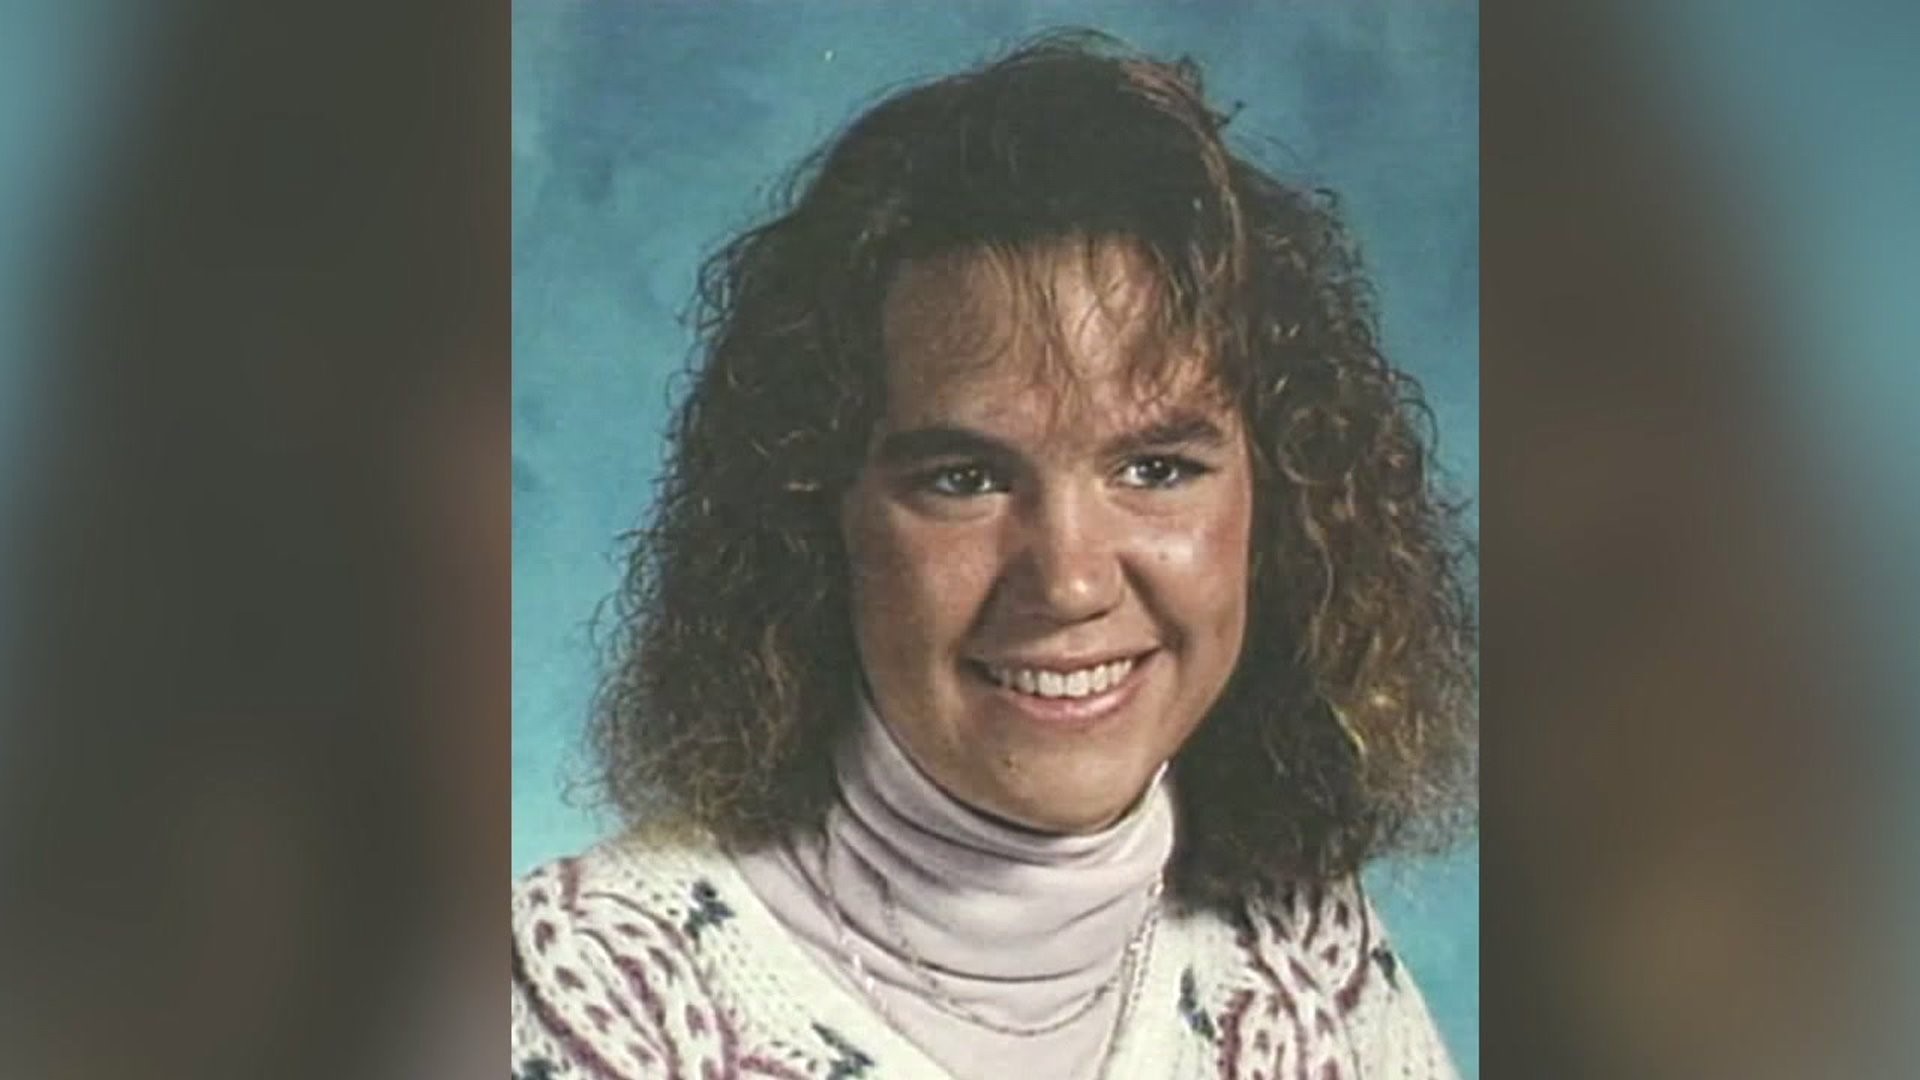 Timeline The murder of Laurie Show, trials and appeals of co